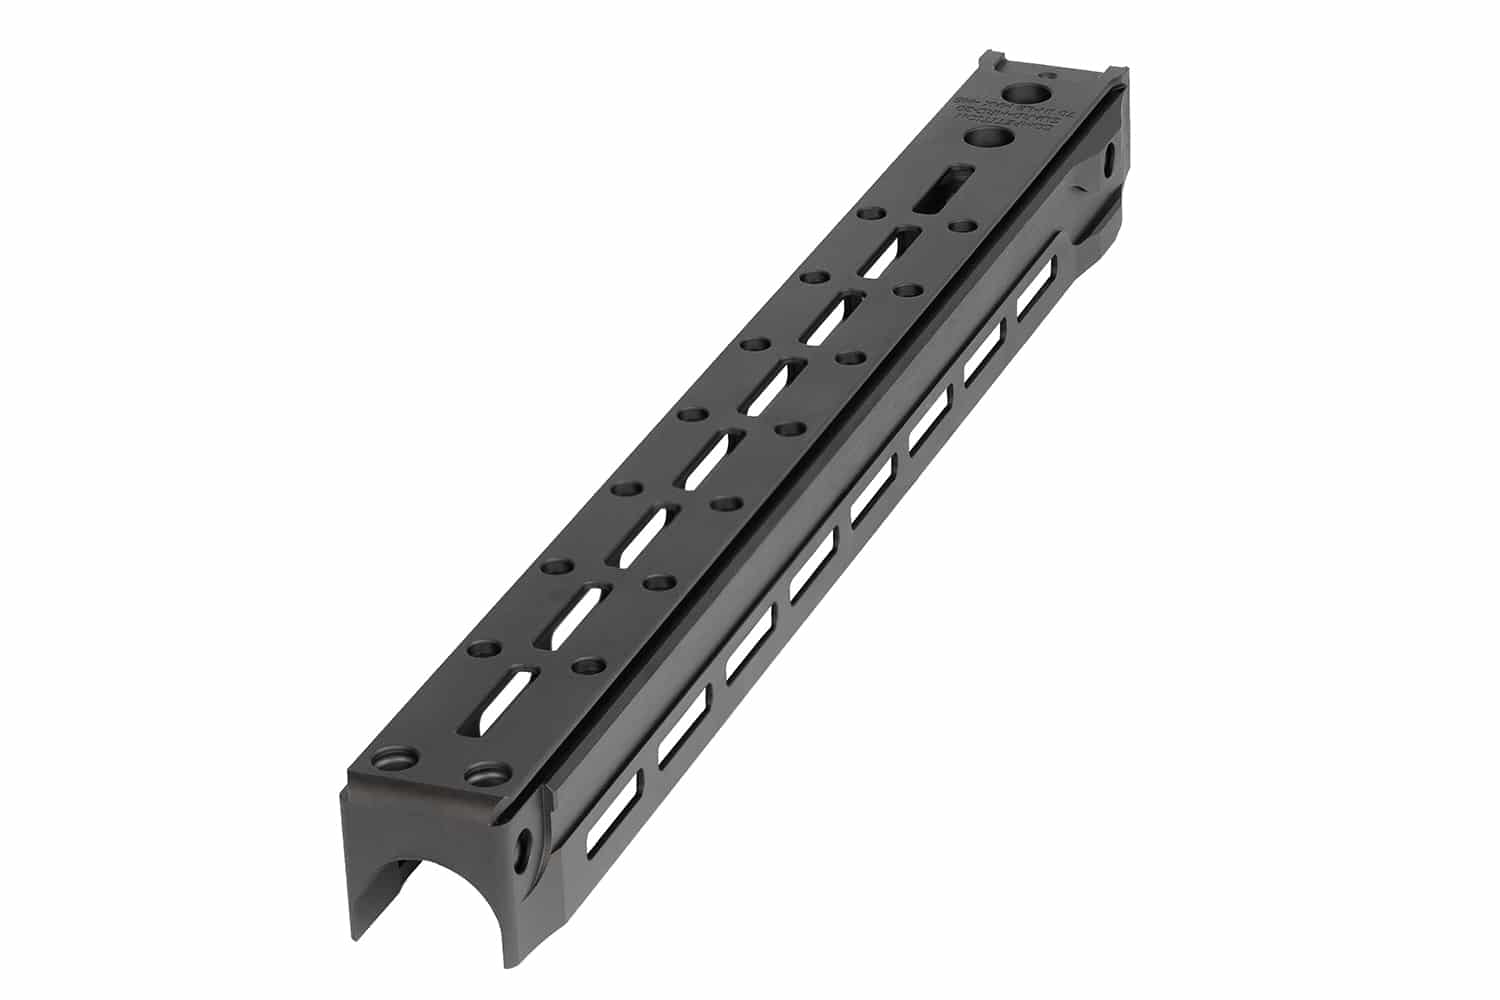 Vision chassis competition forend